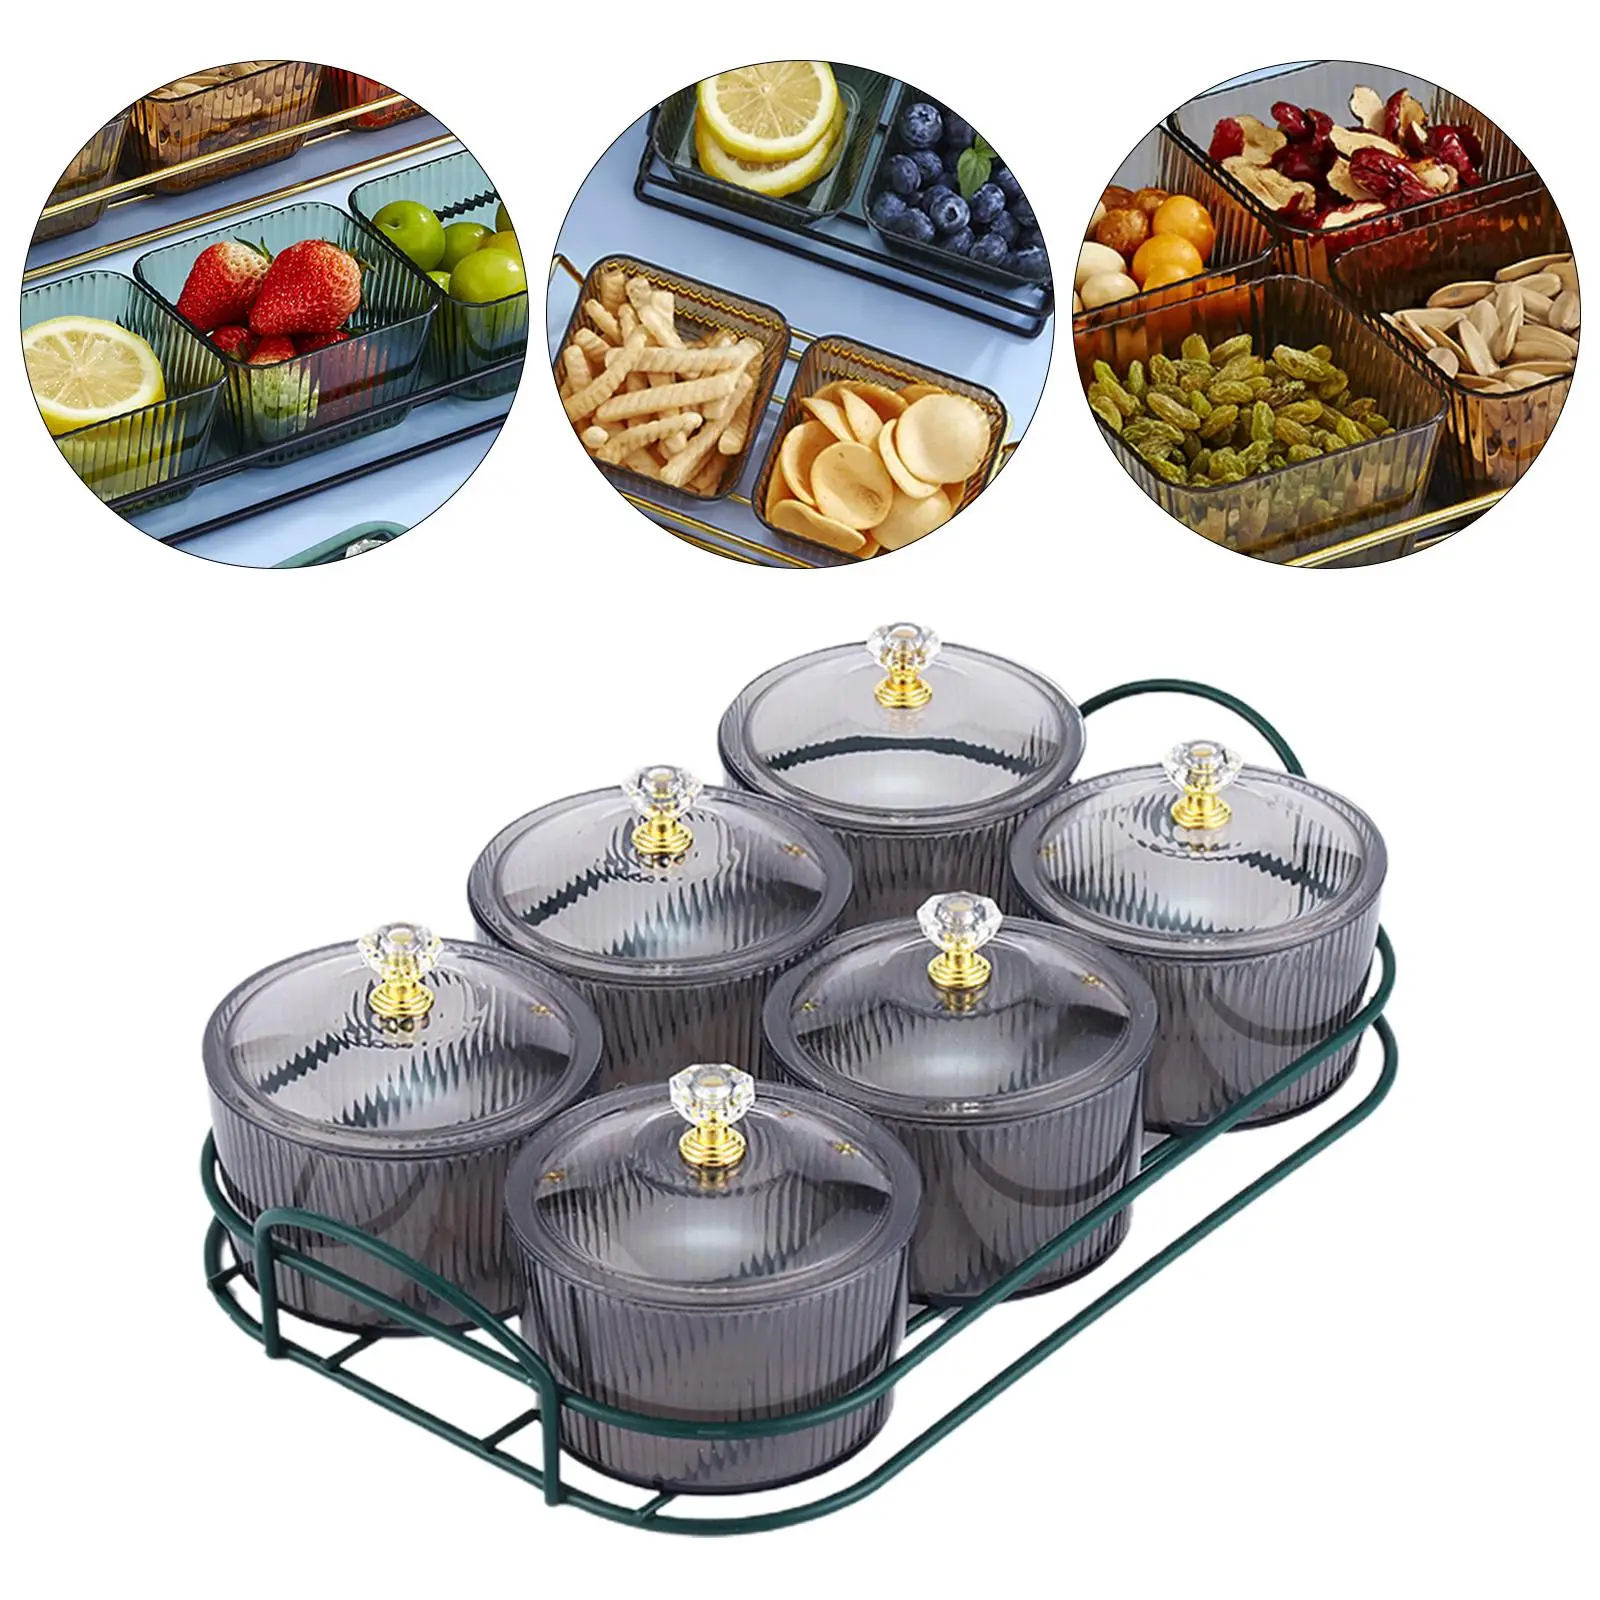 Dried Fruit Tray and 6 Bowls Divided Serving Container with Lid for Kitchen